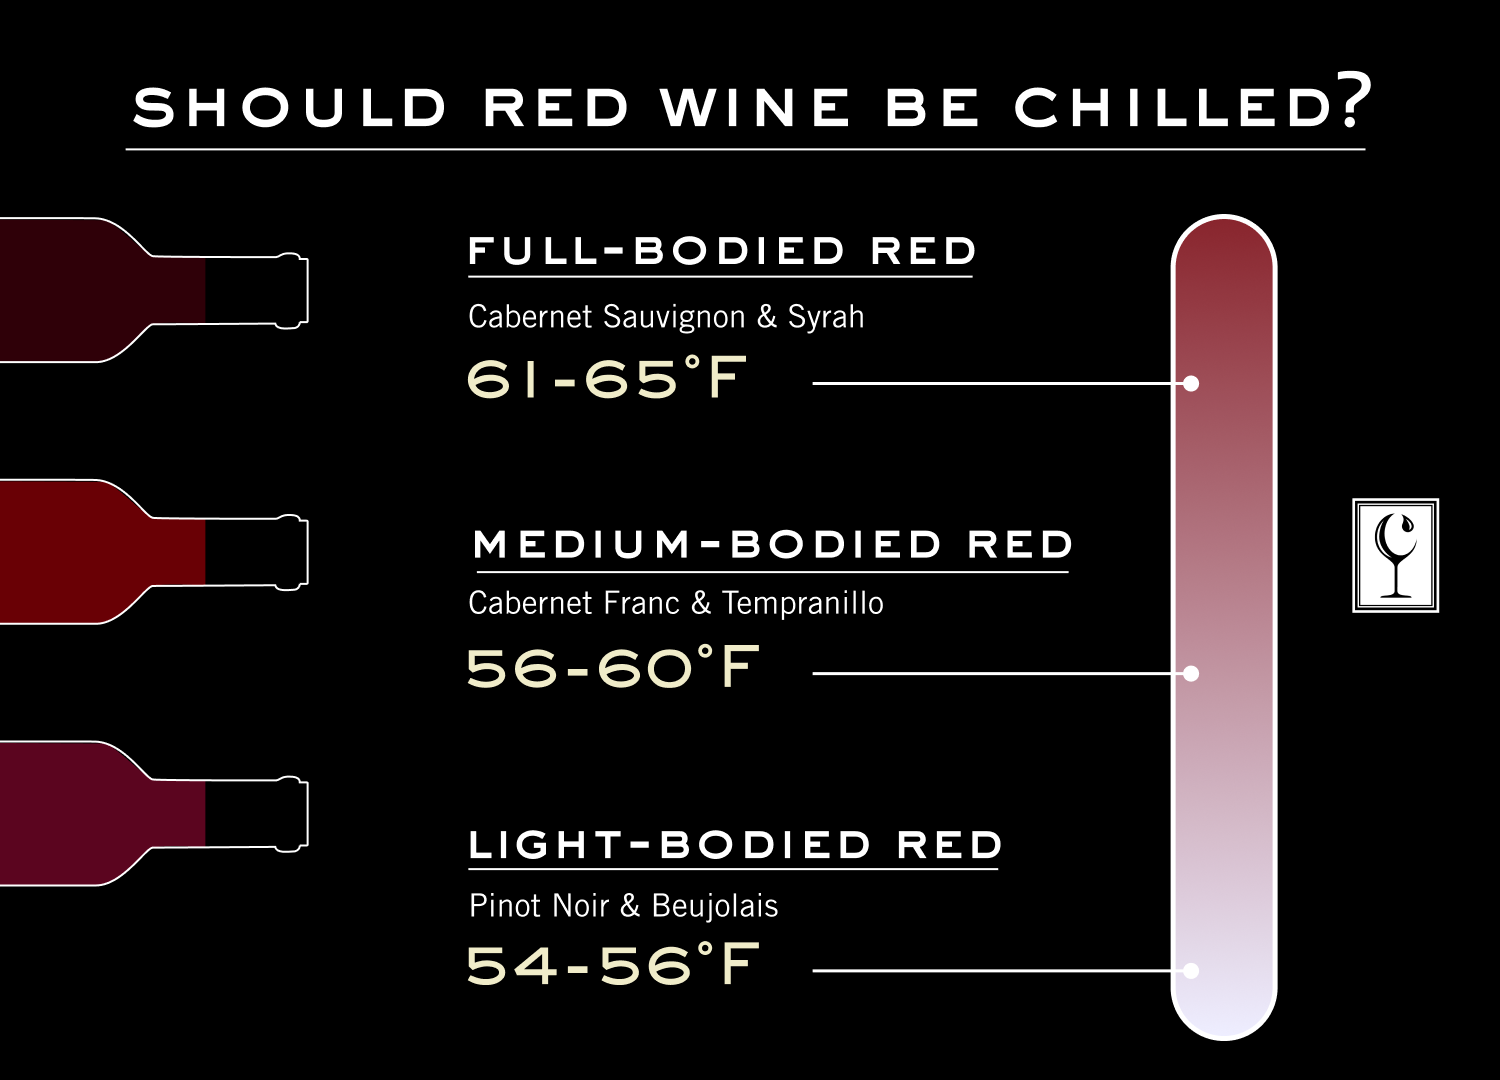 Should red wine be chilled?